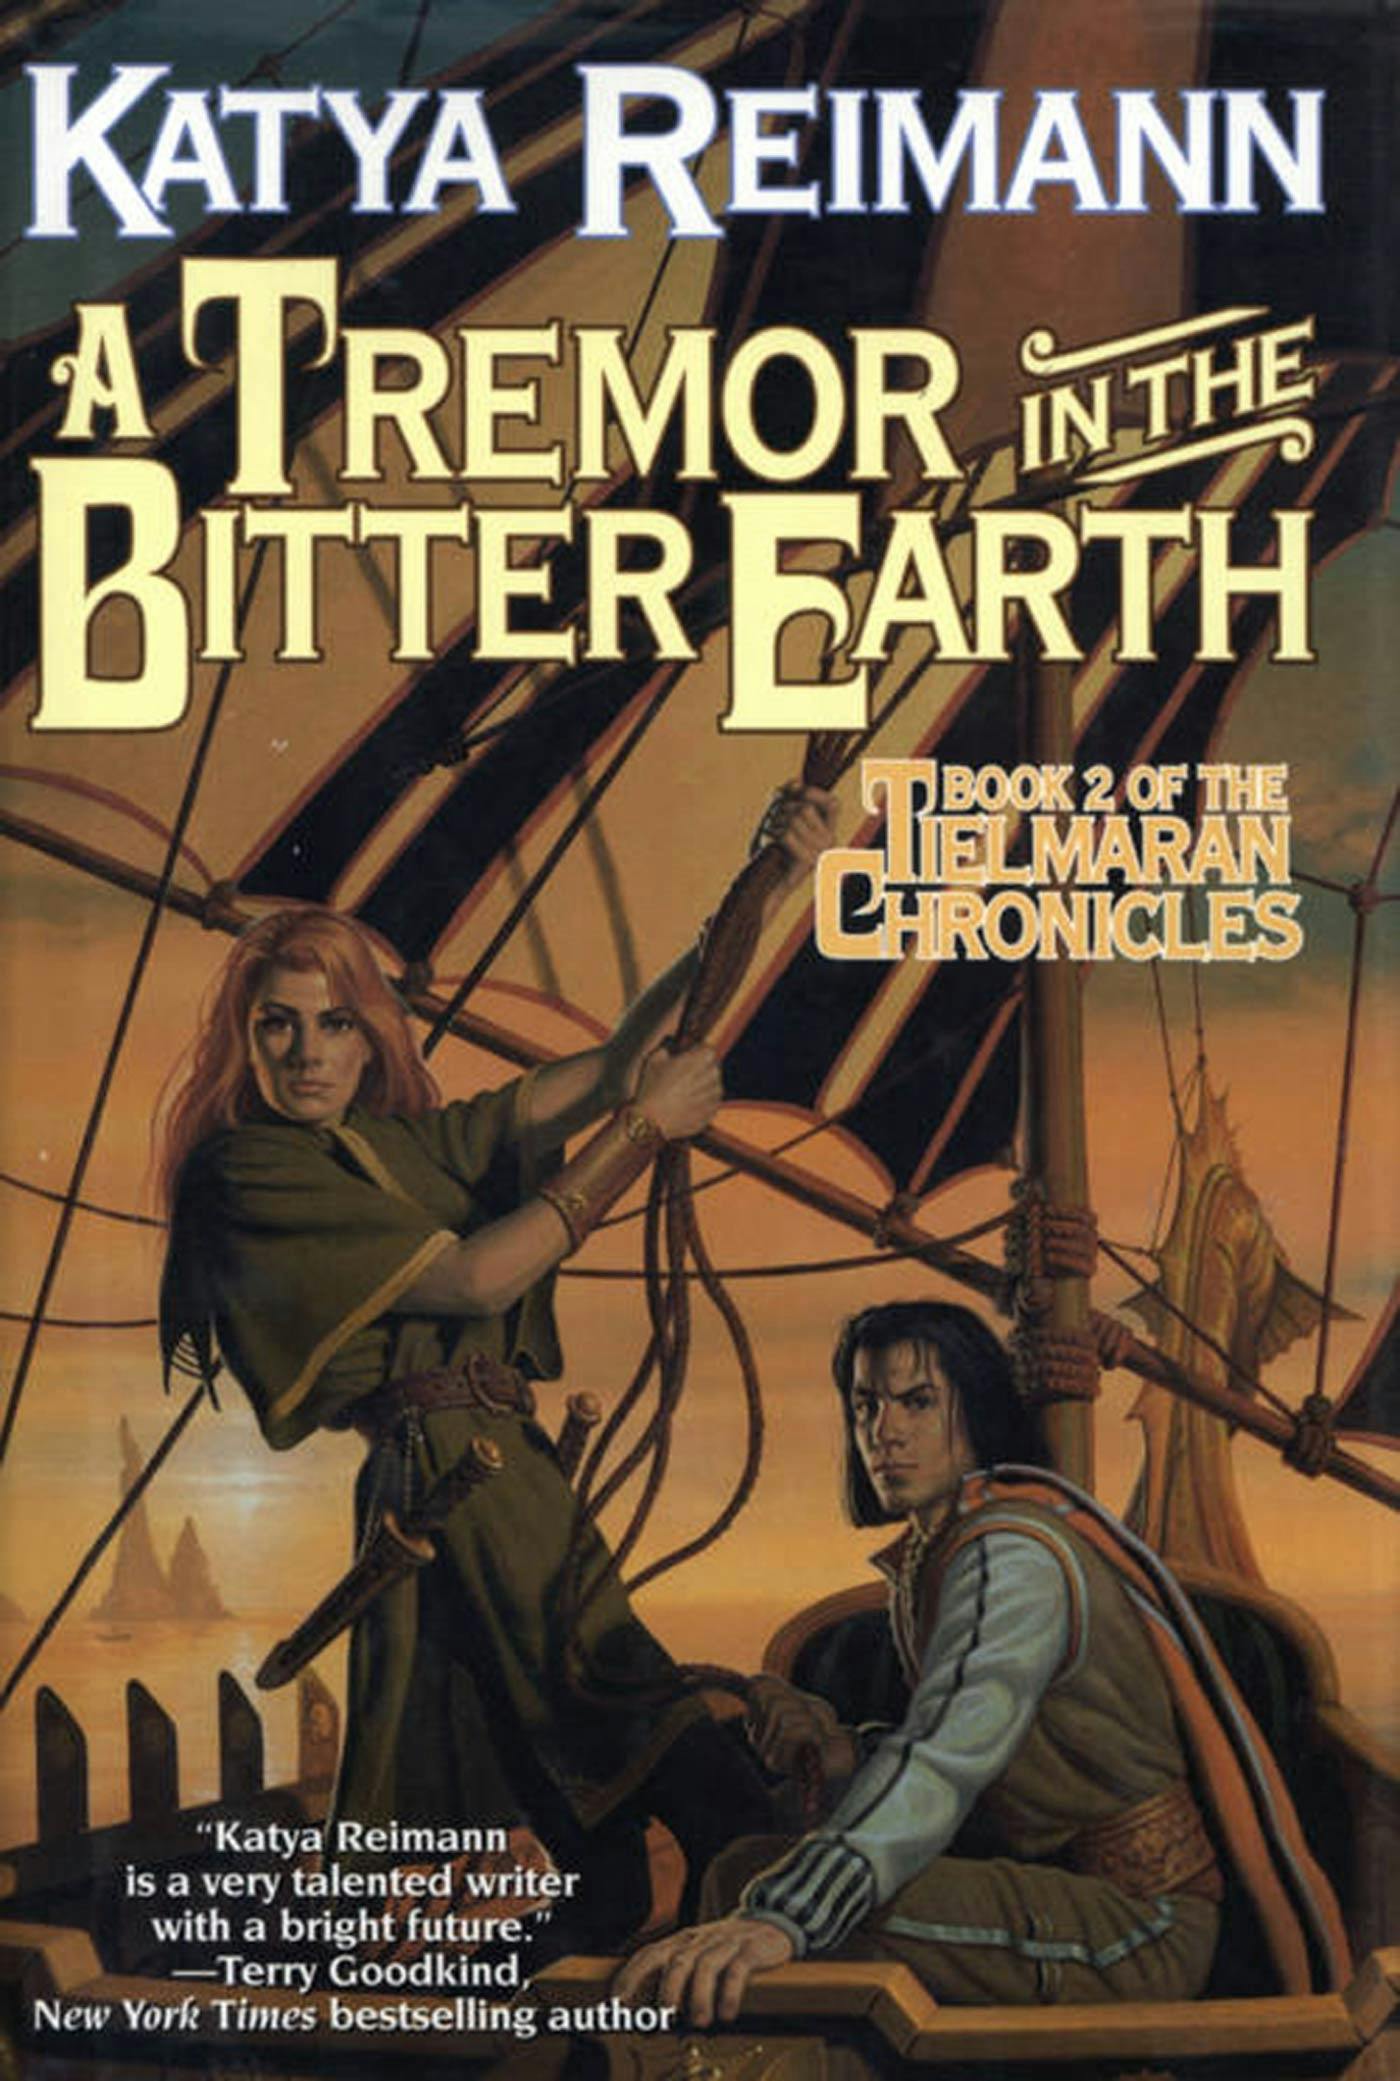 Cover for the book titled as: A Tremor in the Bitter Earth